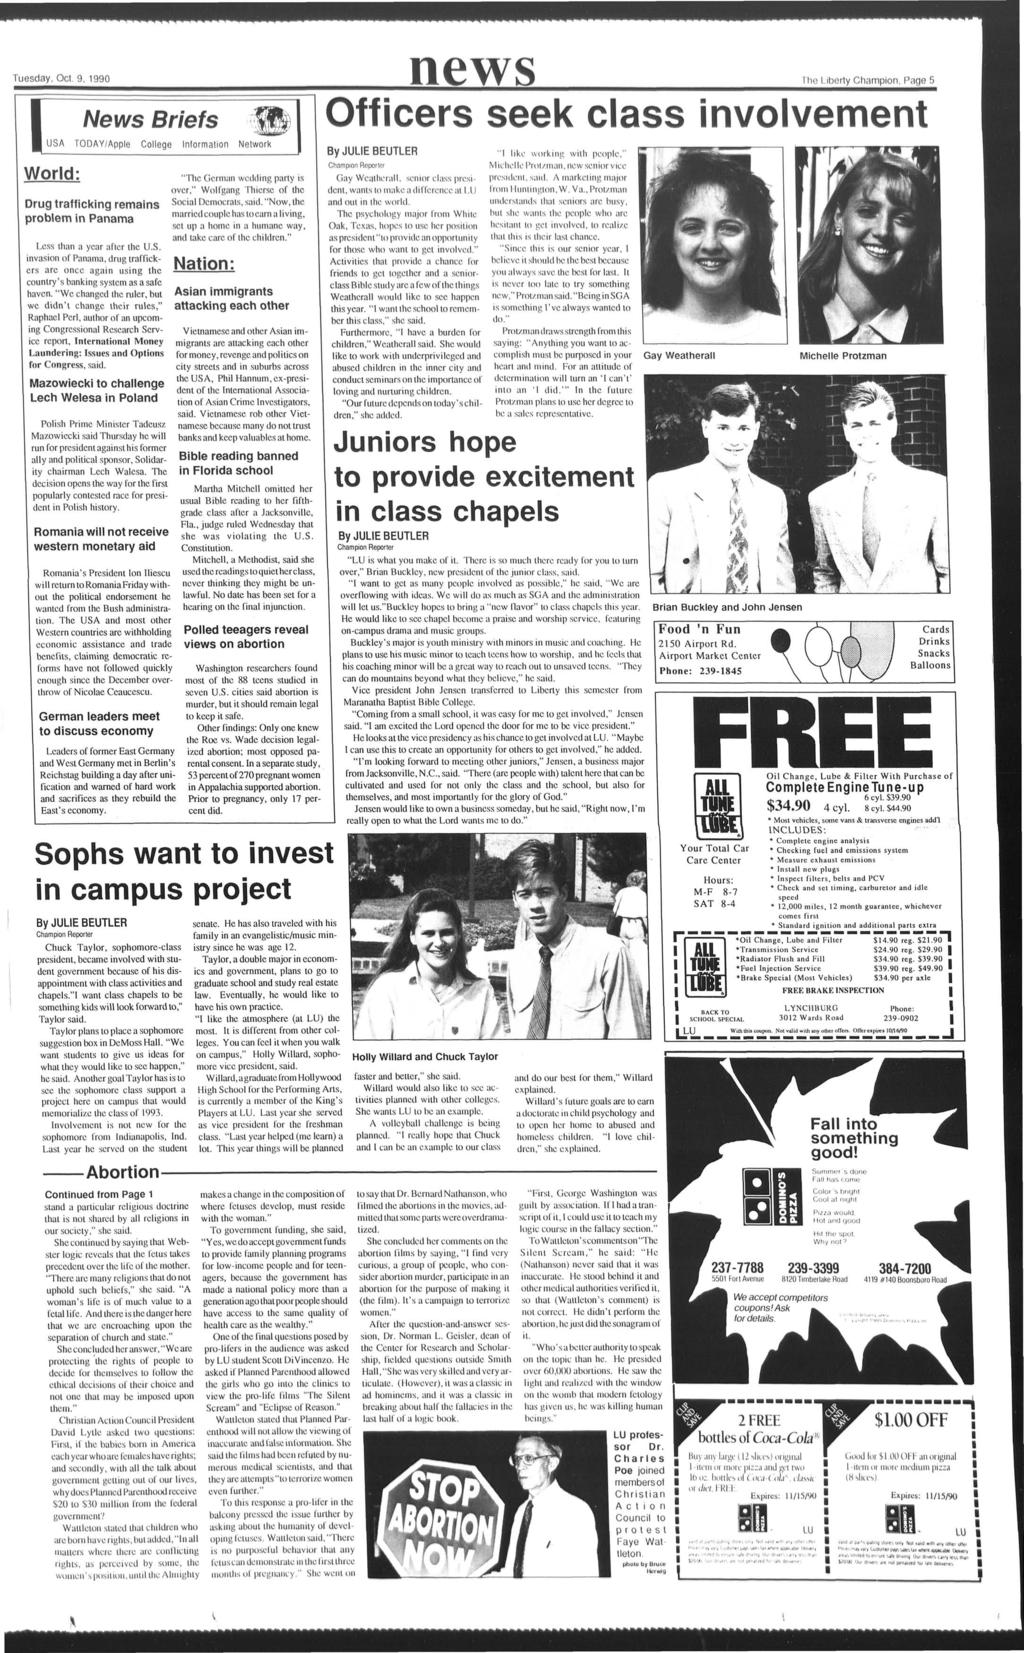 Tuesday, Oct. 9, 1990 news News Brefs USA TODAY/Apple College nformaton Network World: Drug traffckng remans problem n Panama Less than a year after the U.S. nvason of Panama, drug traffckers arc once agan usng the country's bankng system as a safe haven.